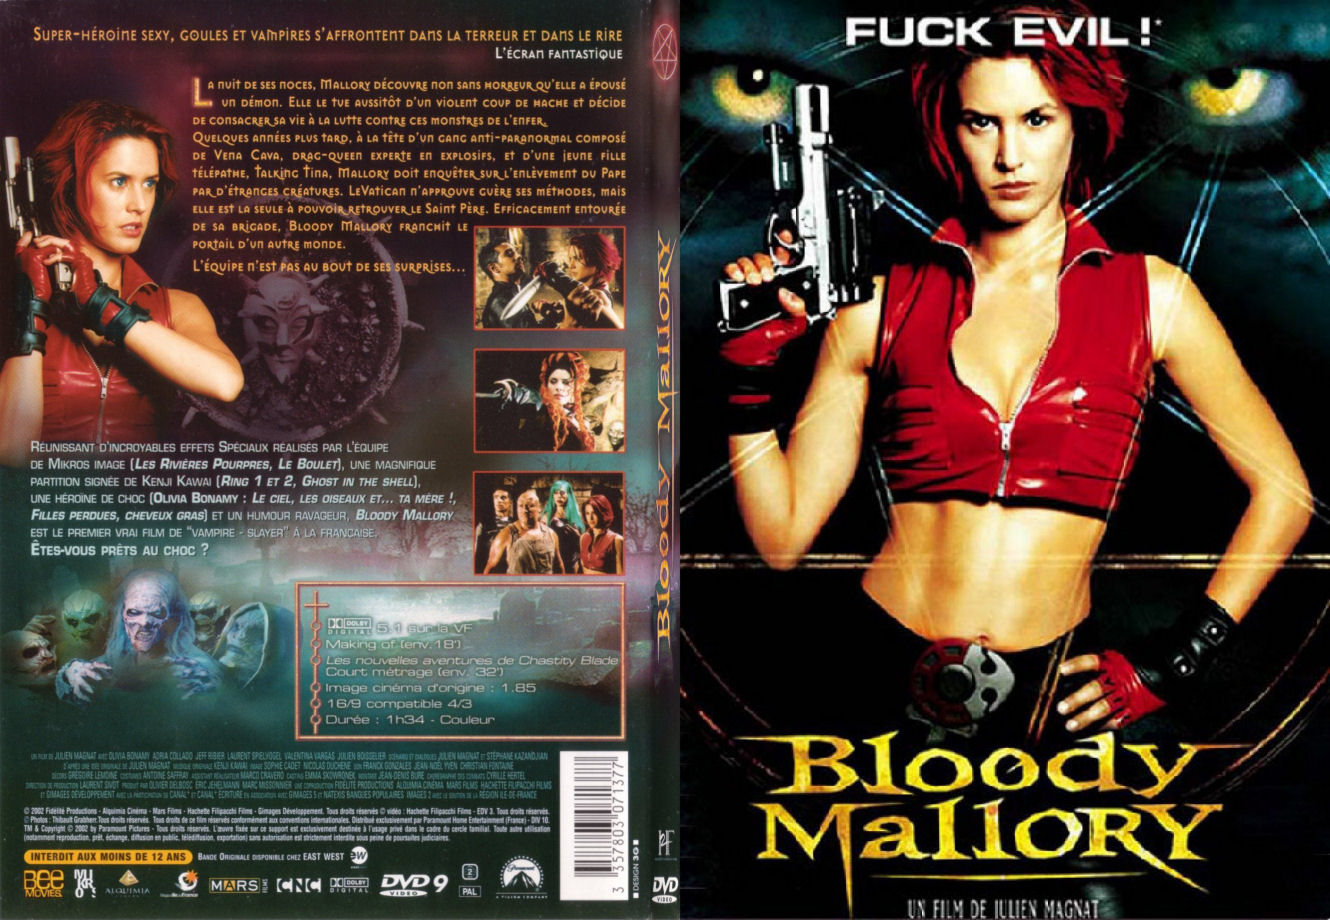 Jaquette DVD Bloody Mallory - SLIM